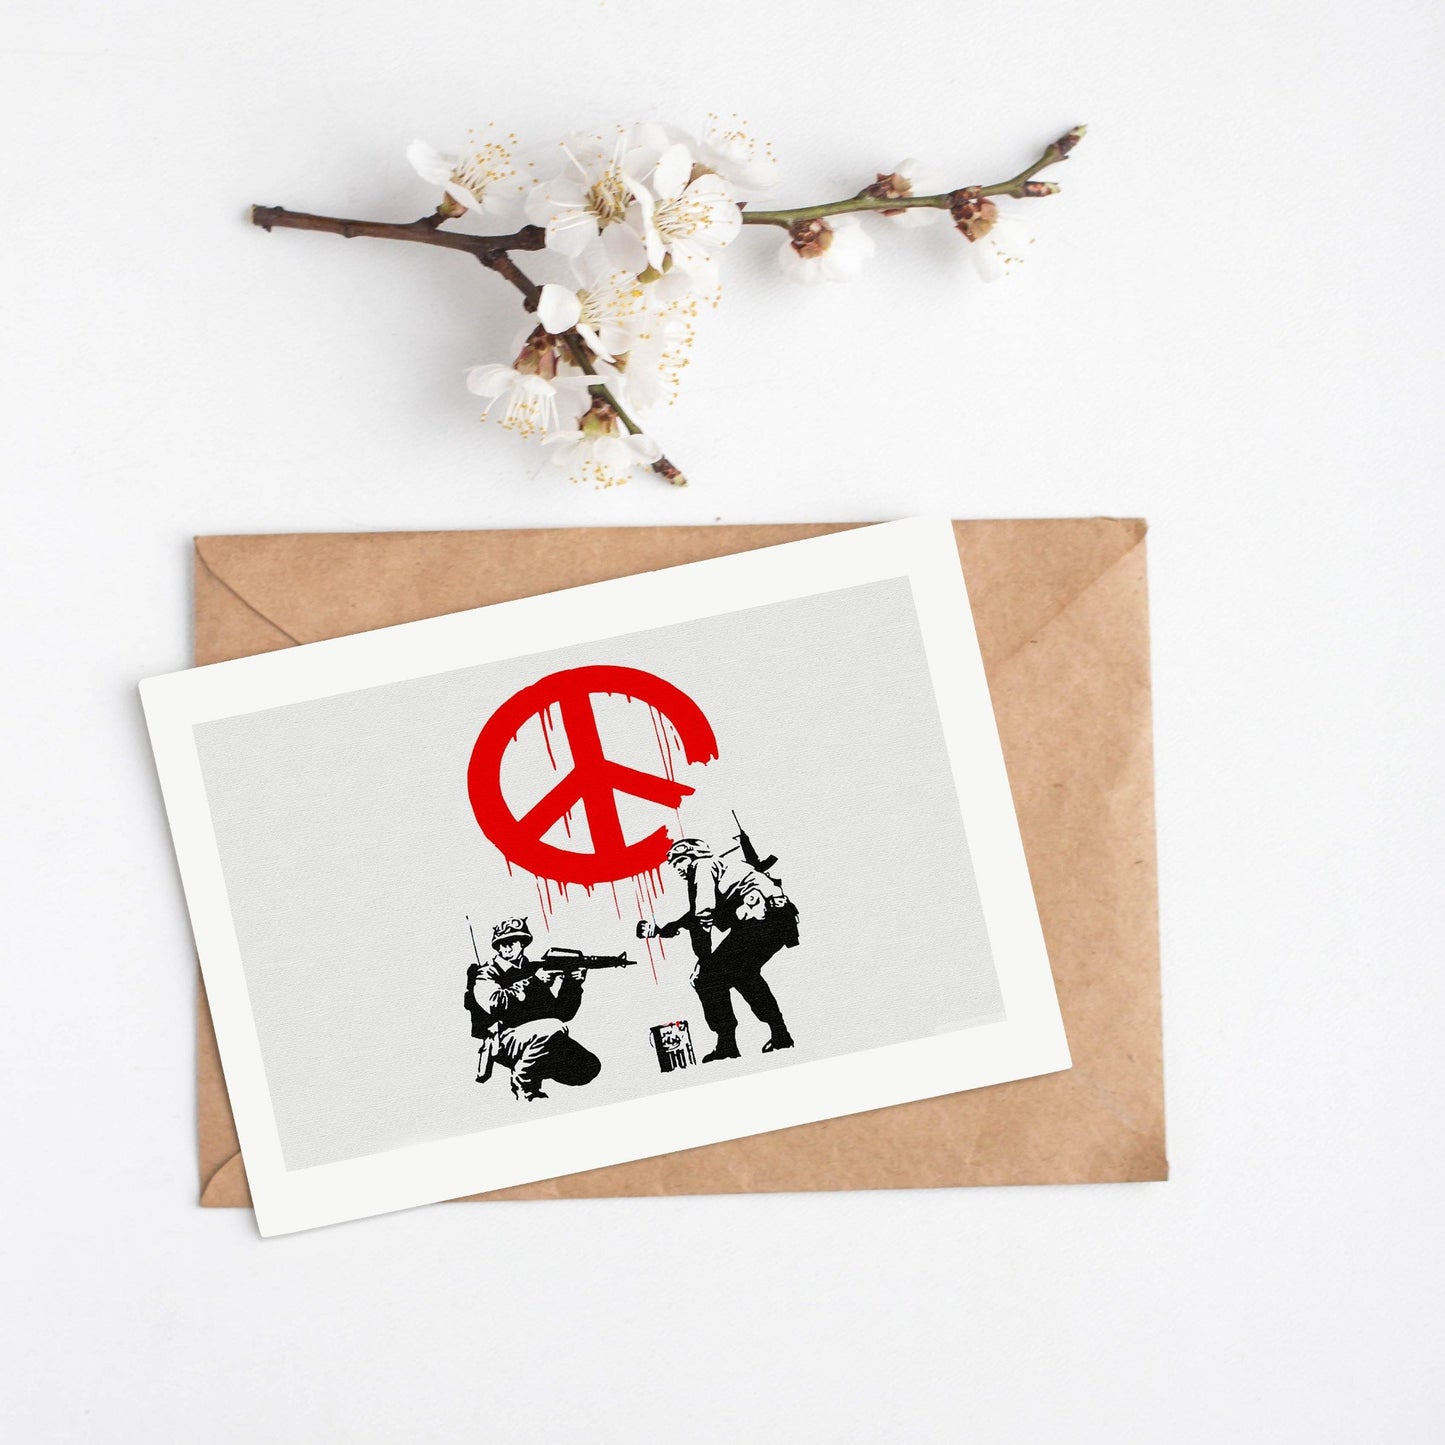 Join the revolution with this Banksy Art Peace Soldiers Poster. With a powerful street art design, this poster is perfect for anyone who wants to make a statement. Whether you're a Banksy fan or just appreciate good art, this poster is sure to liven up any room. Get it for your home, office, or even as a gift for a friend.